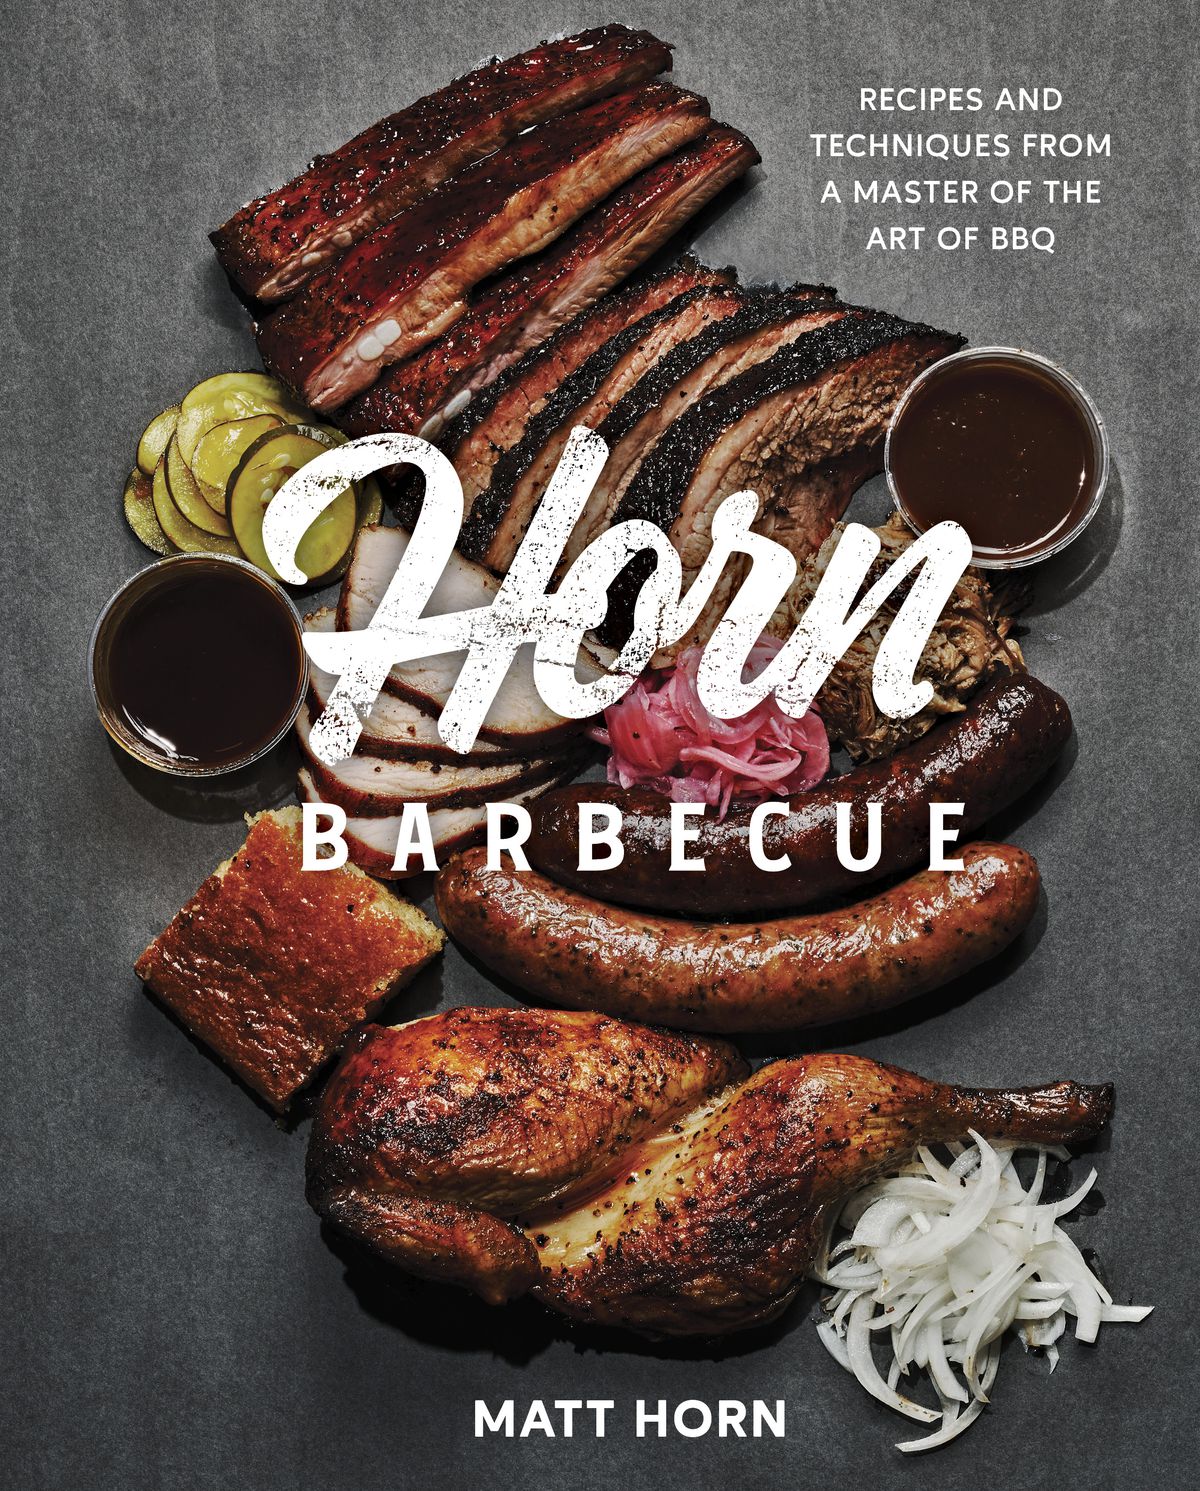 The cover image of the Horn Barbecue cookbook: smoked meats sit on a slate surface.